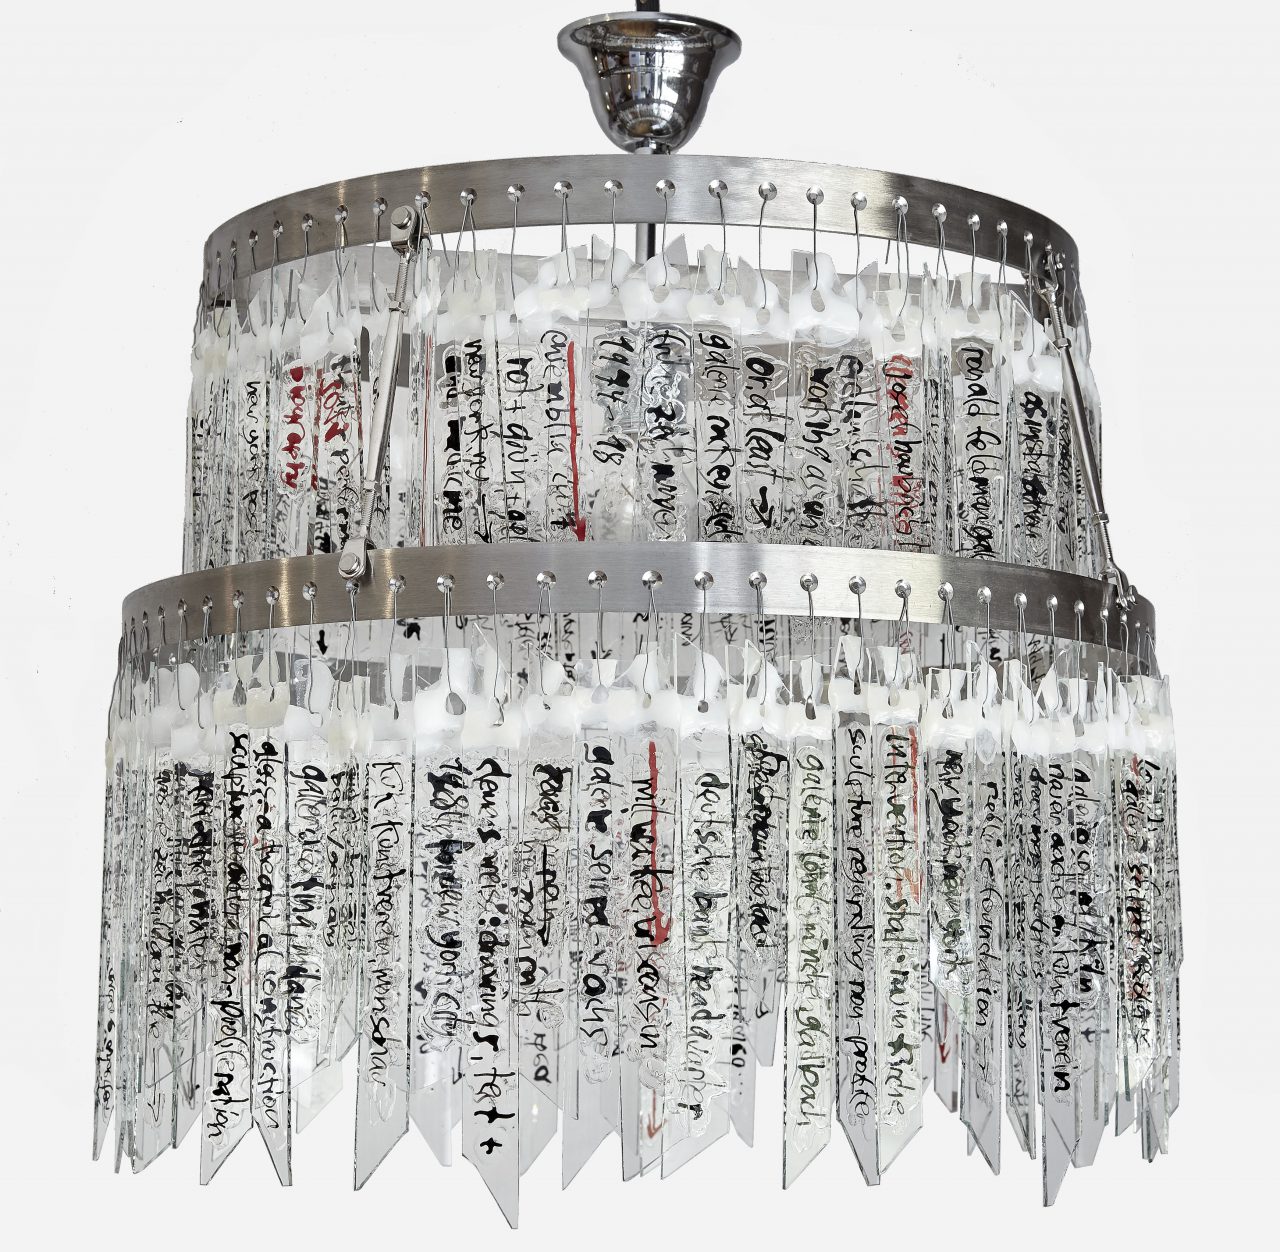 Chandelier 2019 Text: Exhibitions + Locations Stainless Steel, Ink/Glue on Glass, Diameter 52 cm x 64cm